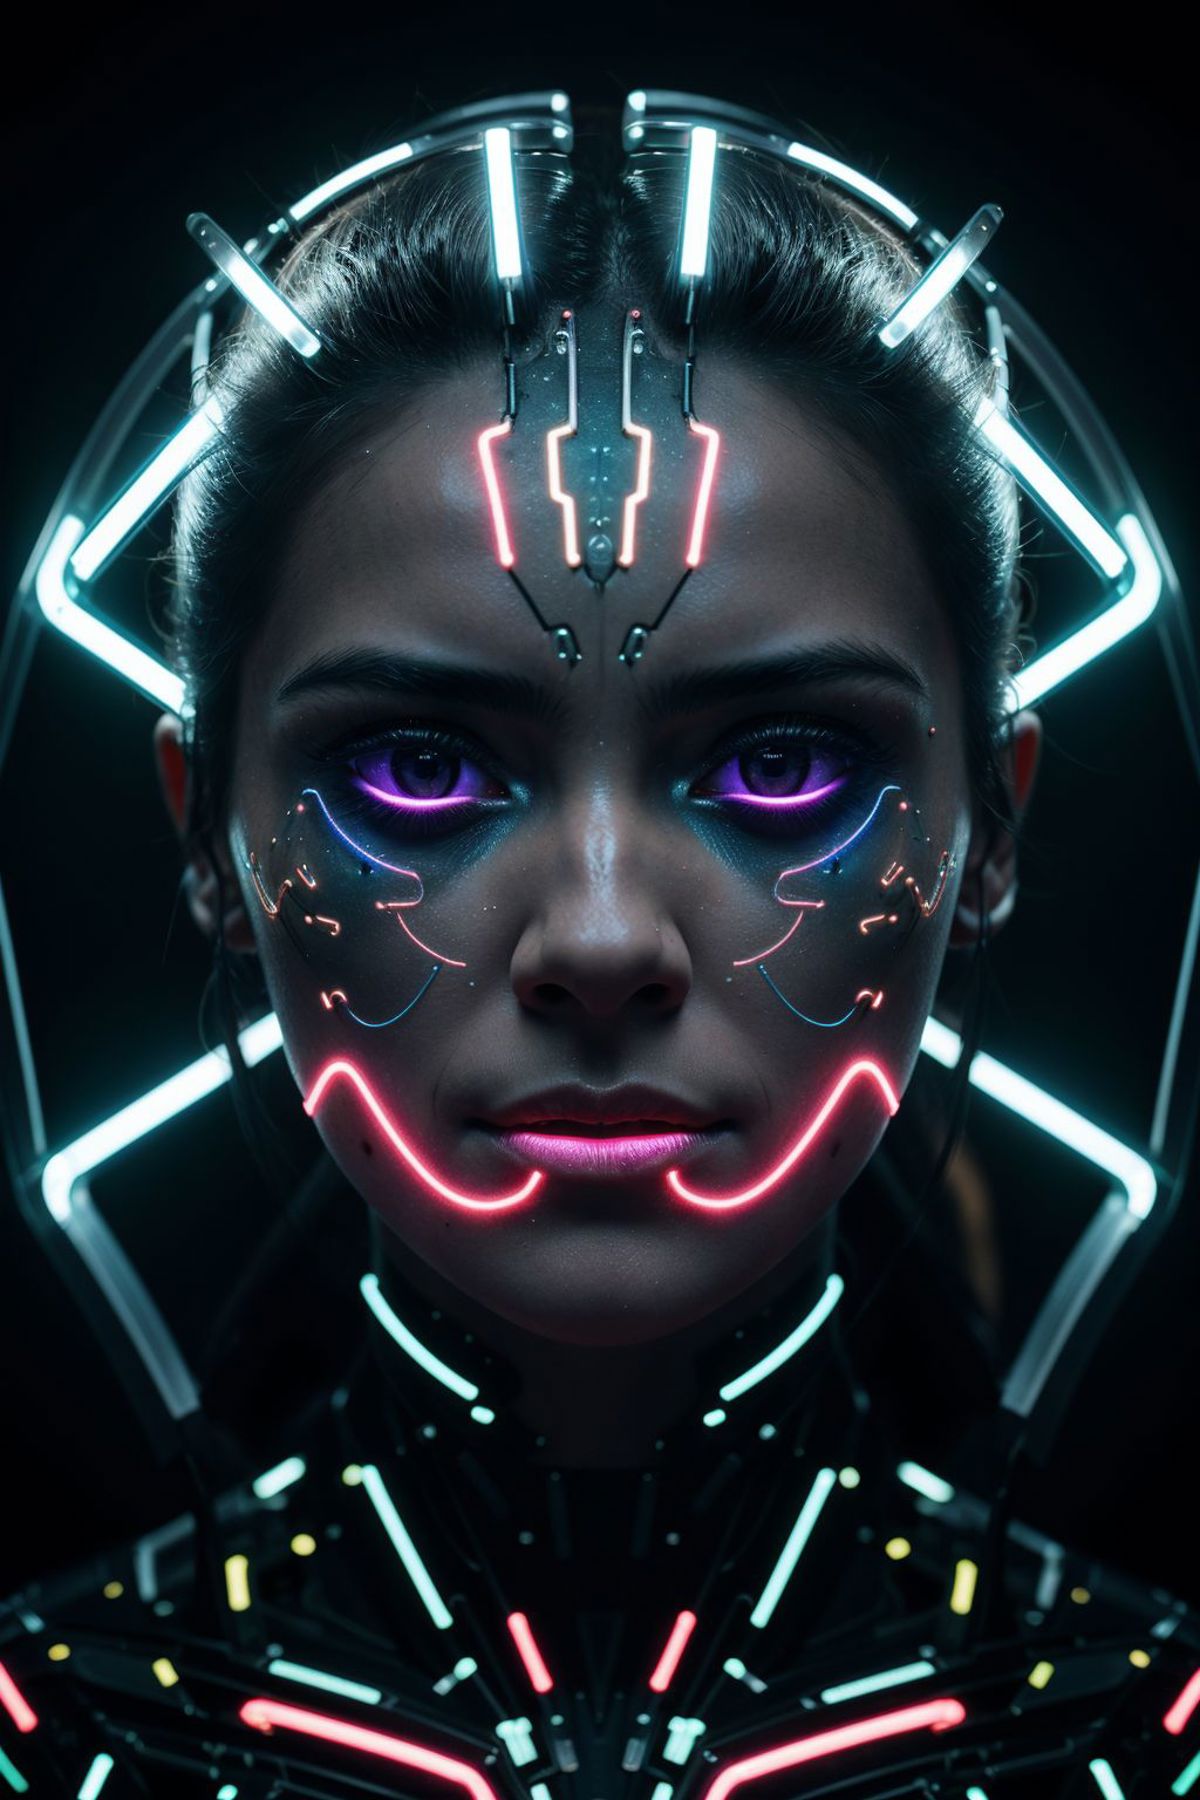 Woman's face with futuristic purple and red designs and lights.